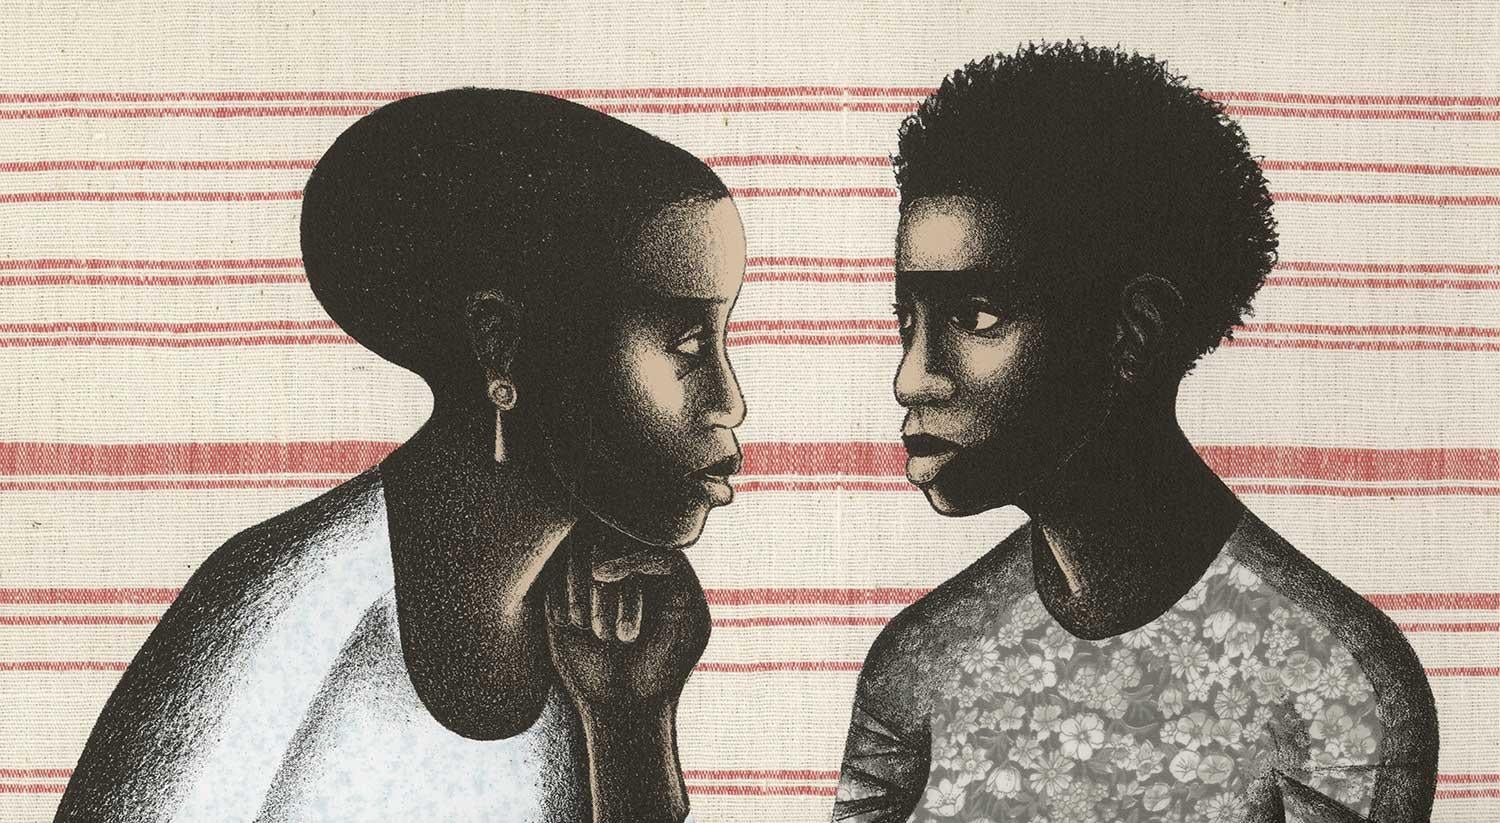 Gossip (Two African American women share their views on life and love) - Print by Elizabeth Catlett